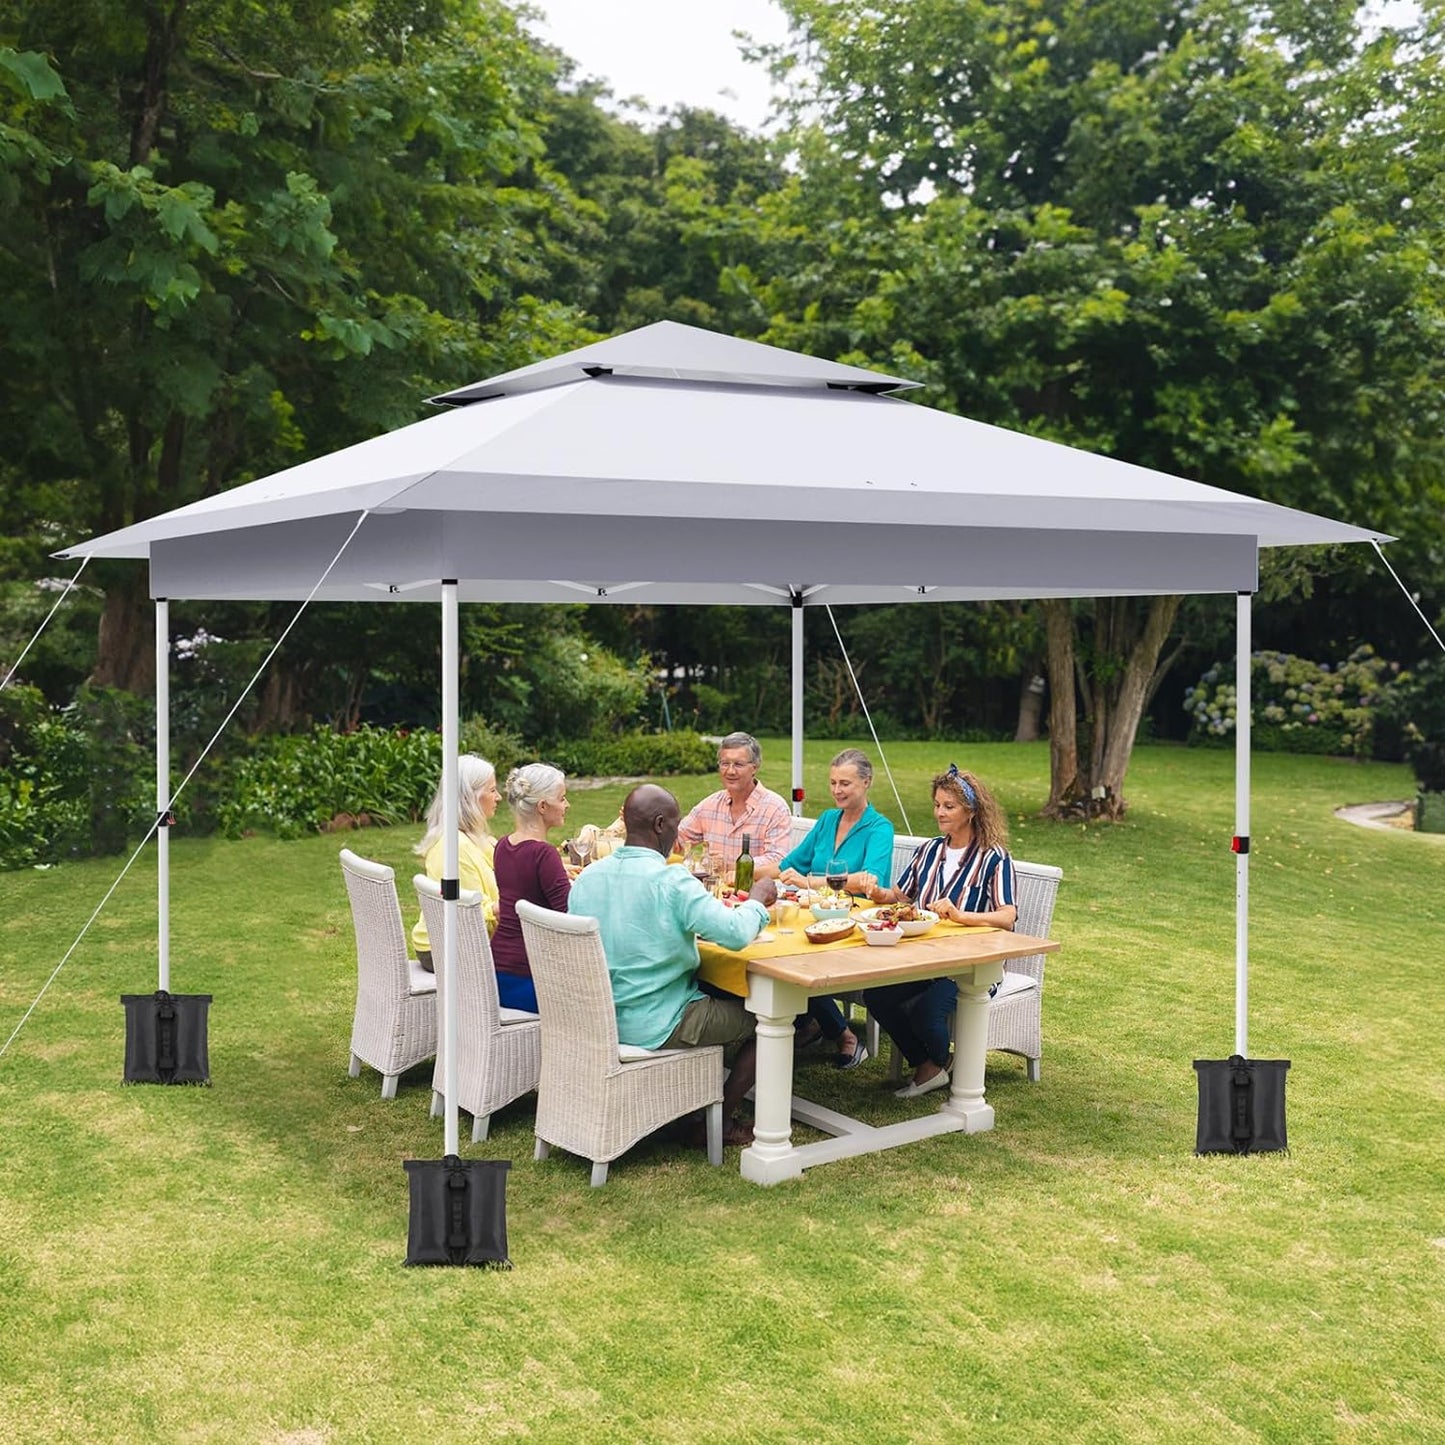 Arlopu 12x12 Easy Set-up Canopy Tent, Instant Outdoor Straight Leg Canopy with Auto Extending Eaves, One Person Folding Commercial Shelter with Upgraded Wheeled Bag, 144 sq.ft Sun Shade